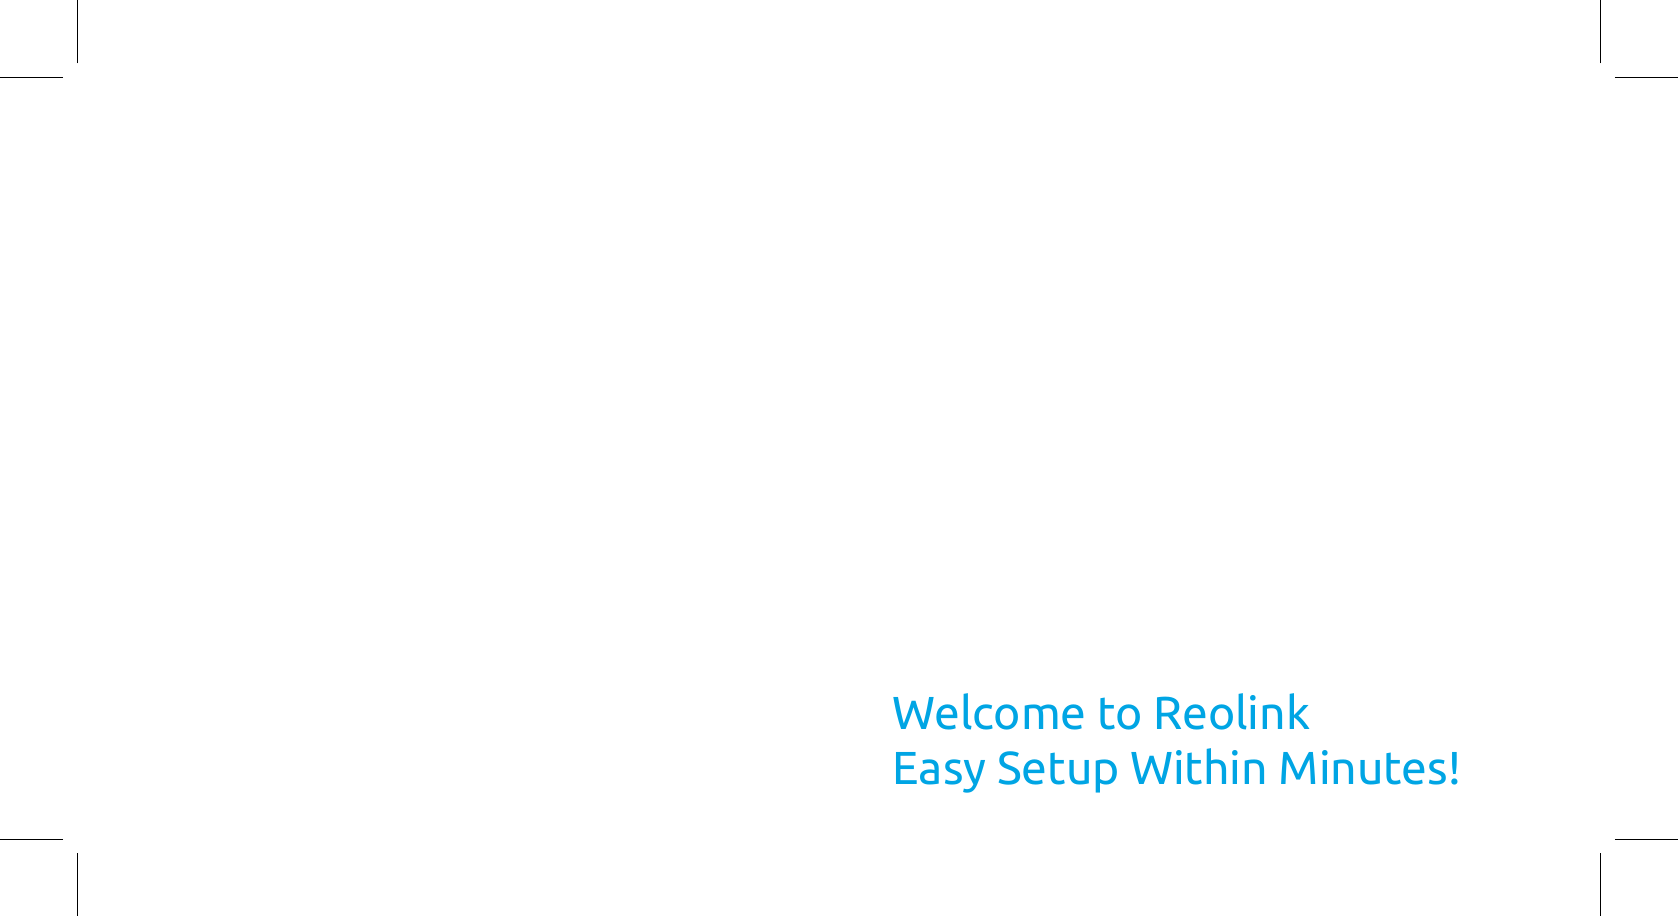 Welcome to ReolinkEasy Setup Within Minutes!